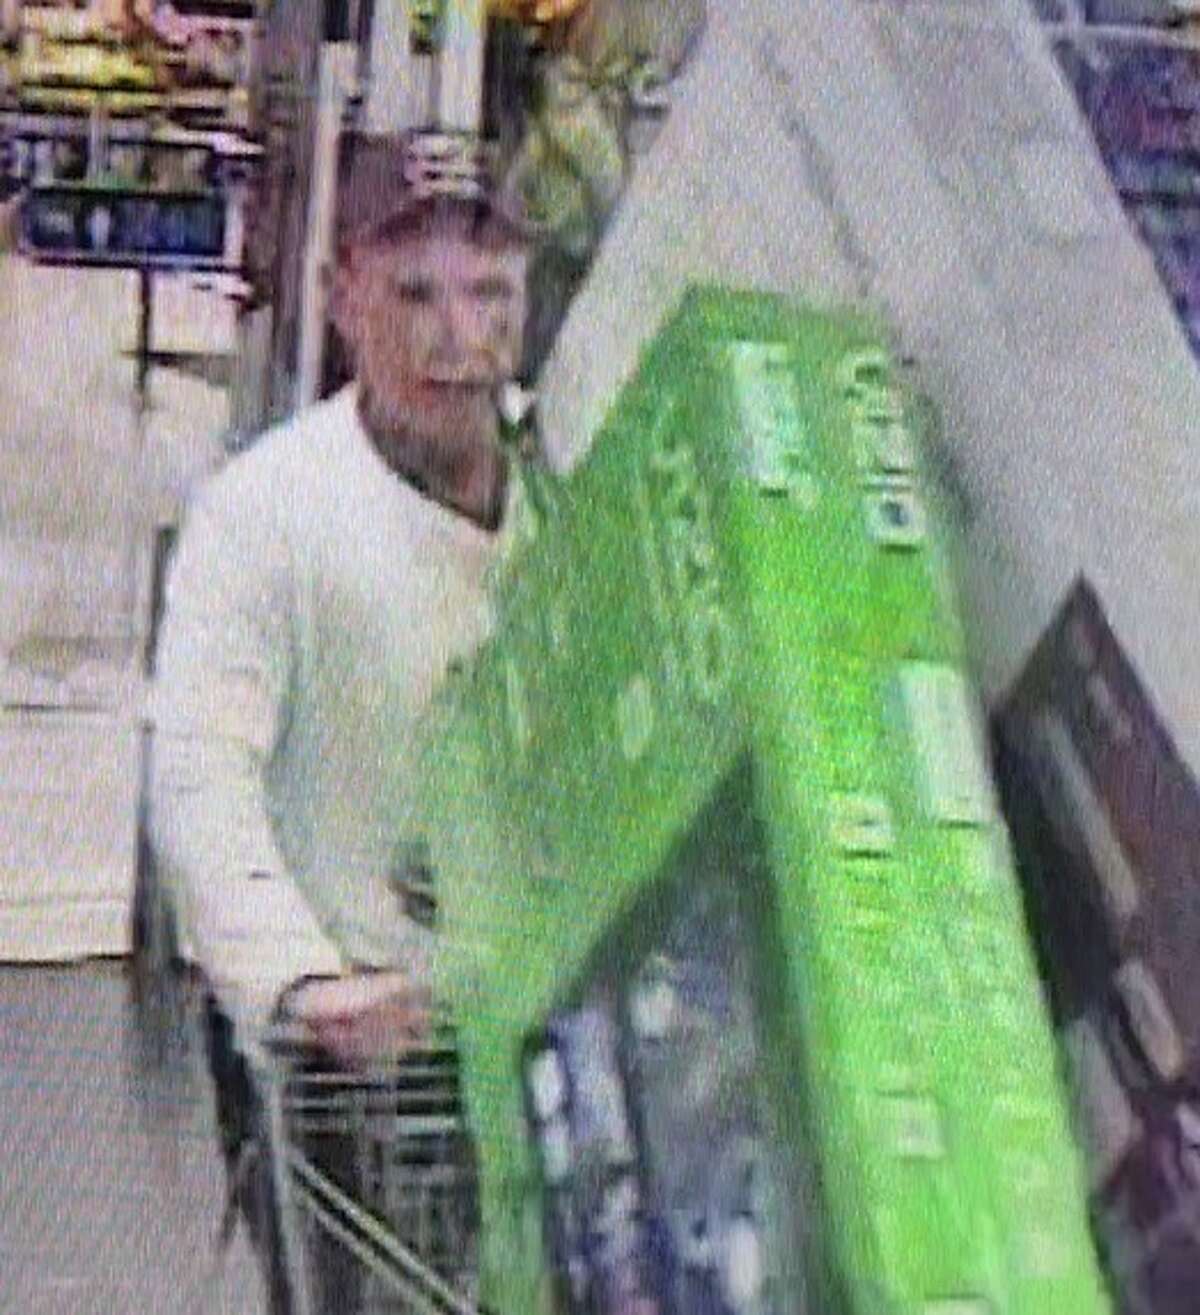 Midland police officers responded on Sept. 24 at about 9:04 p.m. to a reported theft at the Walmart located at 4517 N. Midland Drive.The man left the store with two flat-screen televisions without paying, according to Midland Crime Stoppers. 